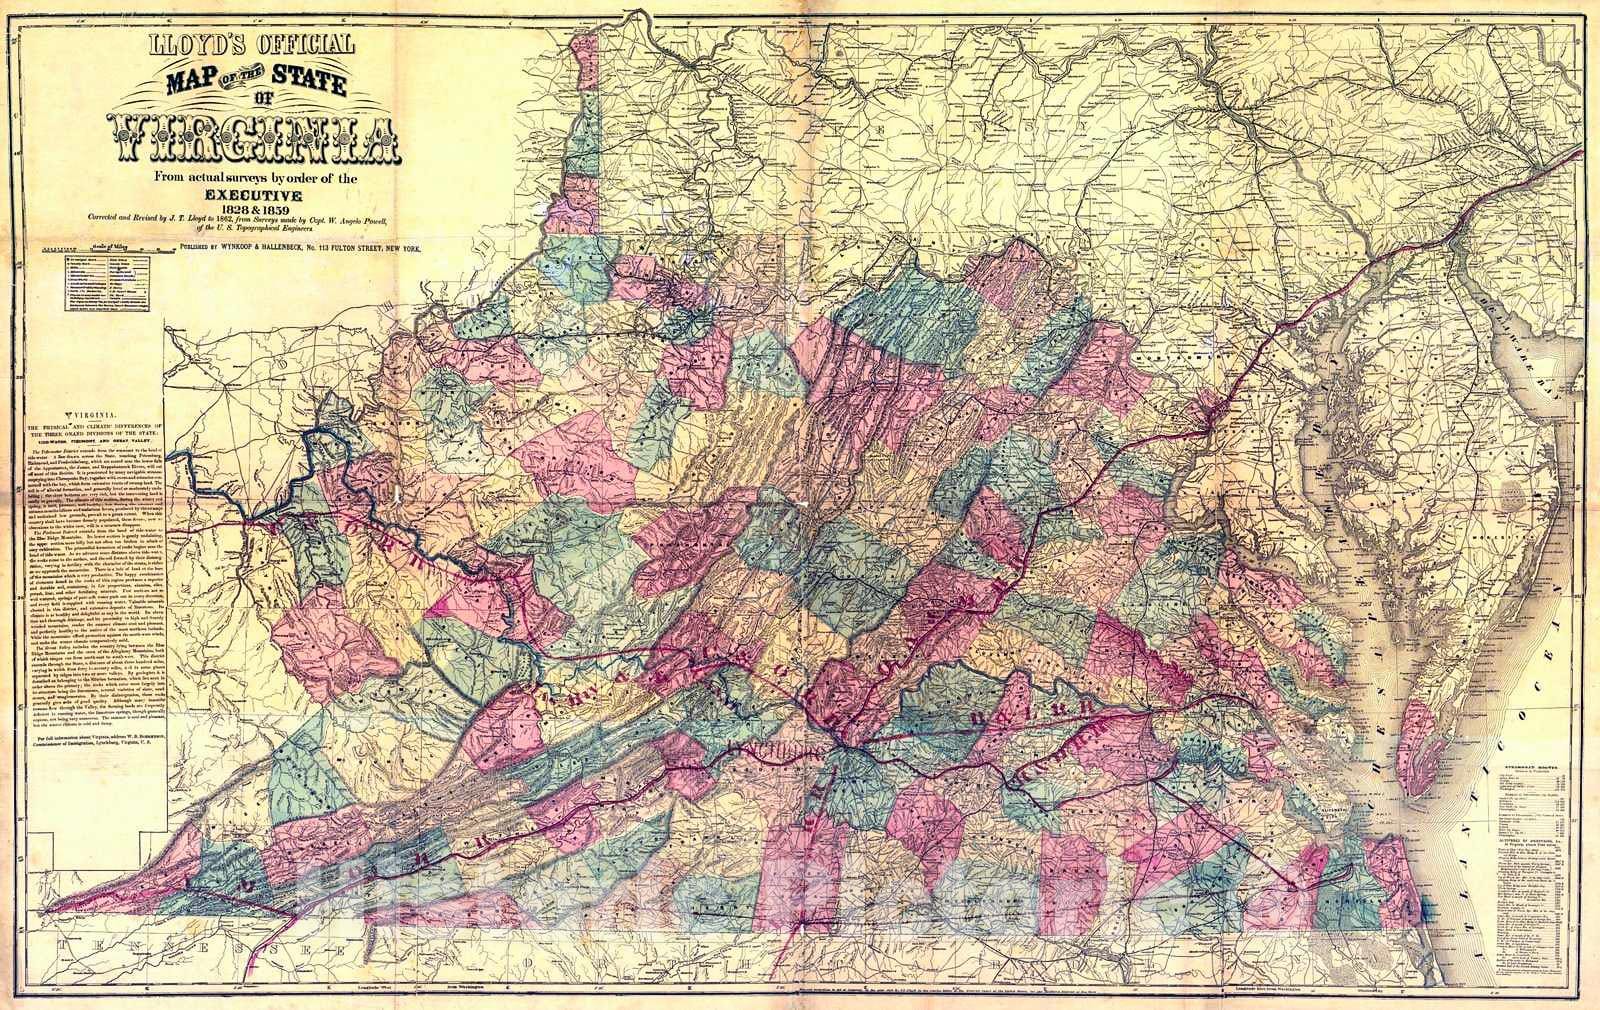 Historic Map : 1862 Lloyd's Official Map of the State of Virginia : Vintage Wall Art